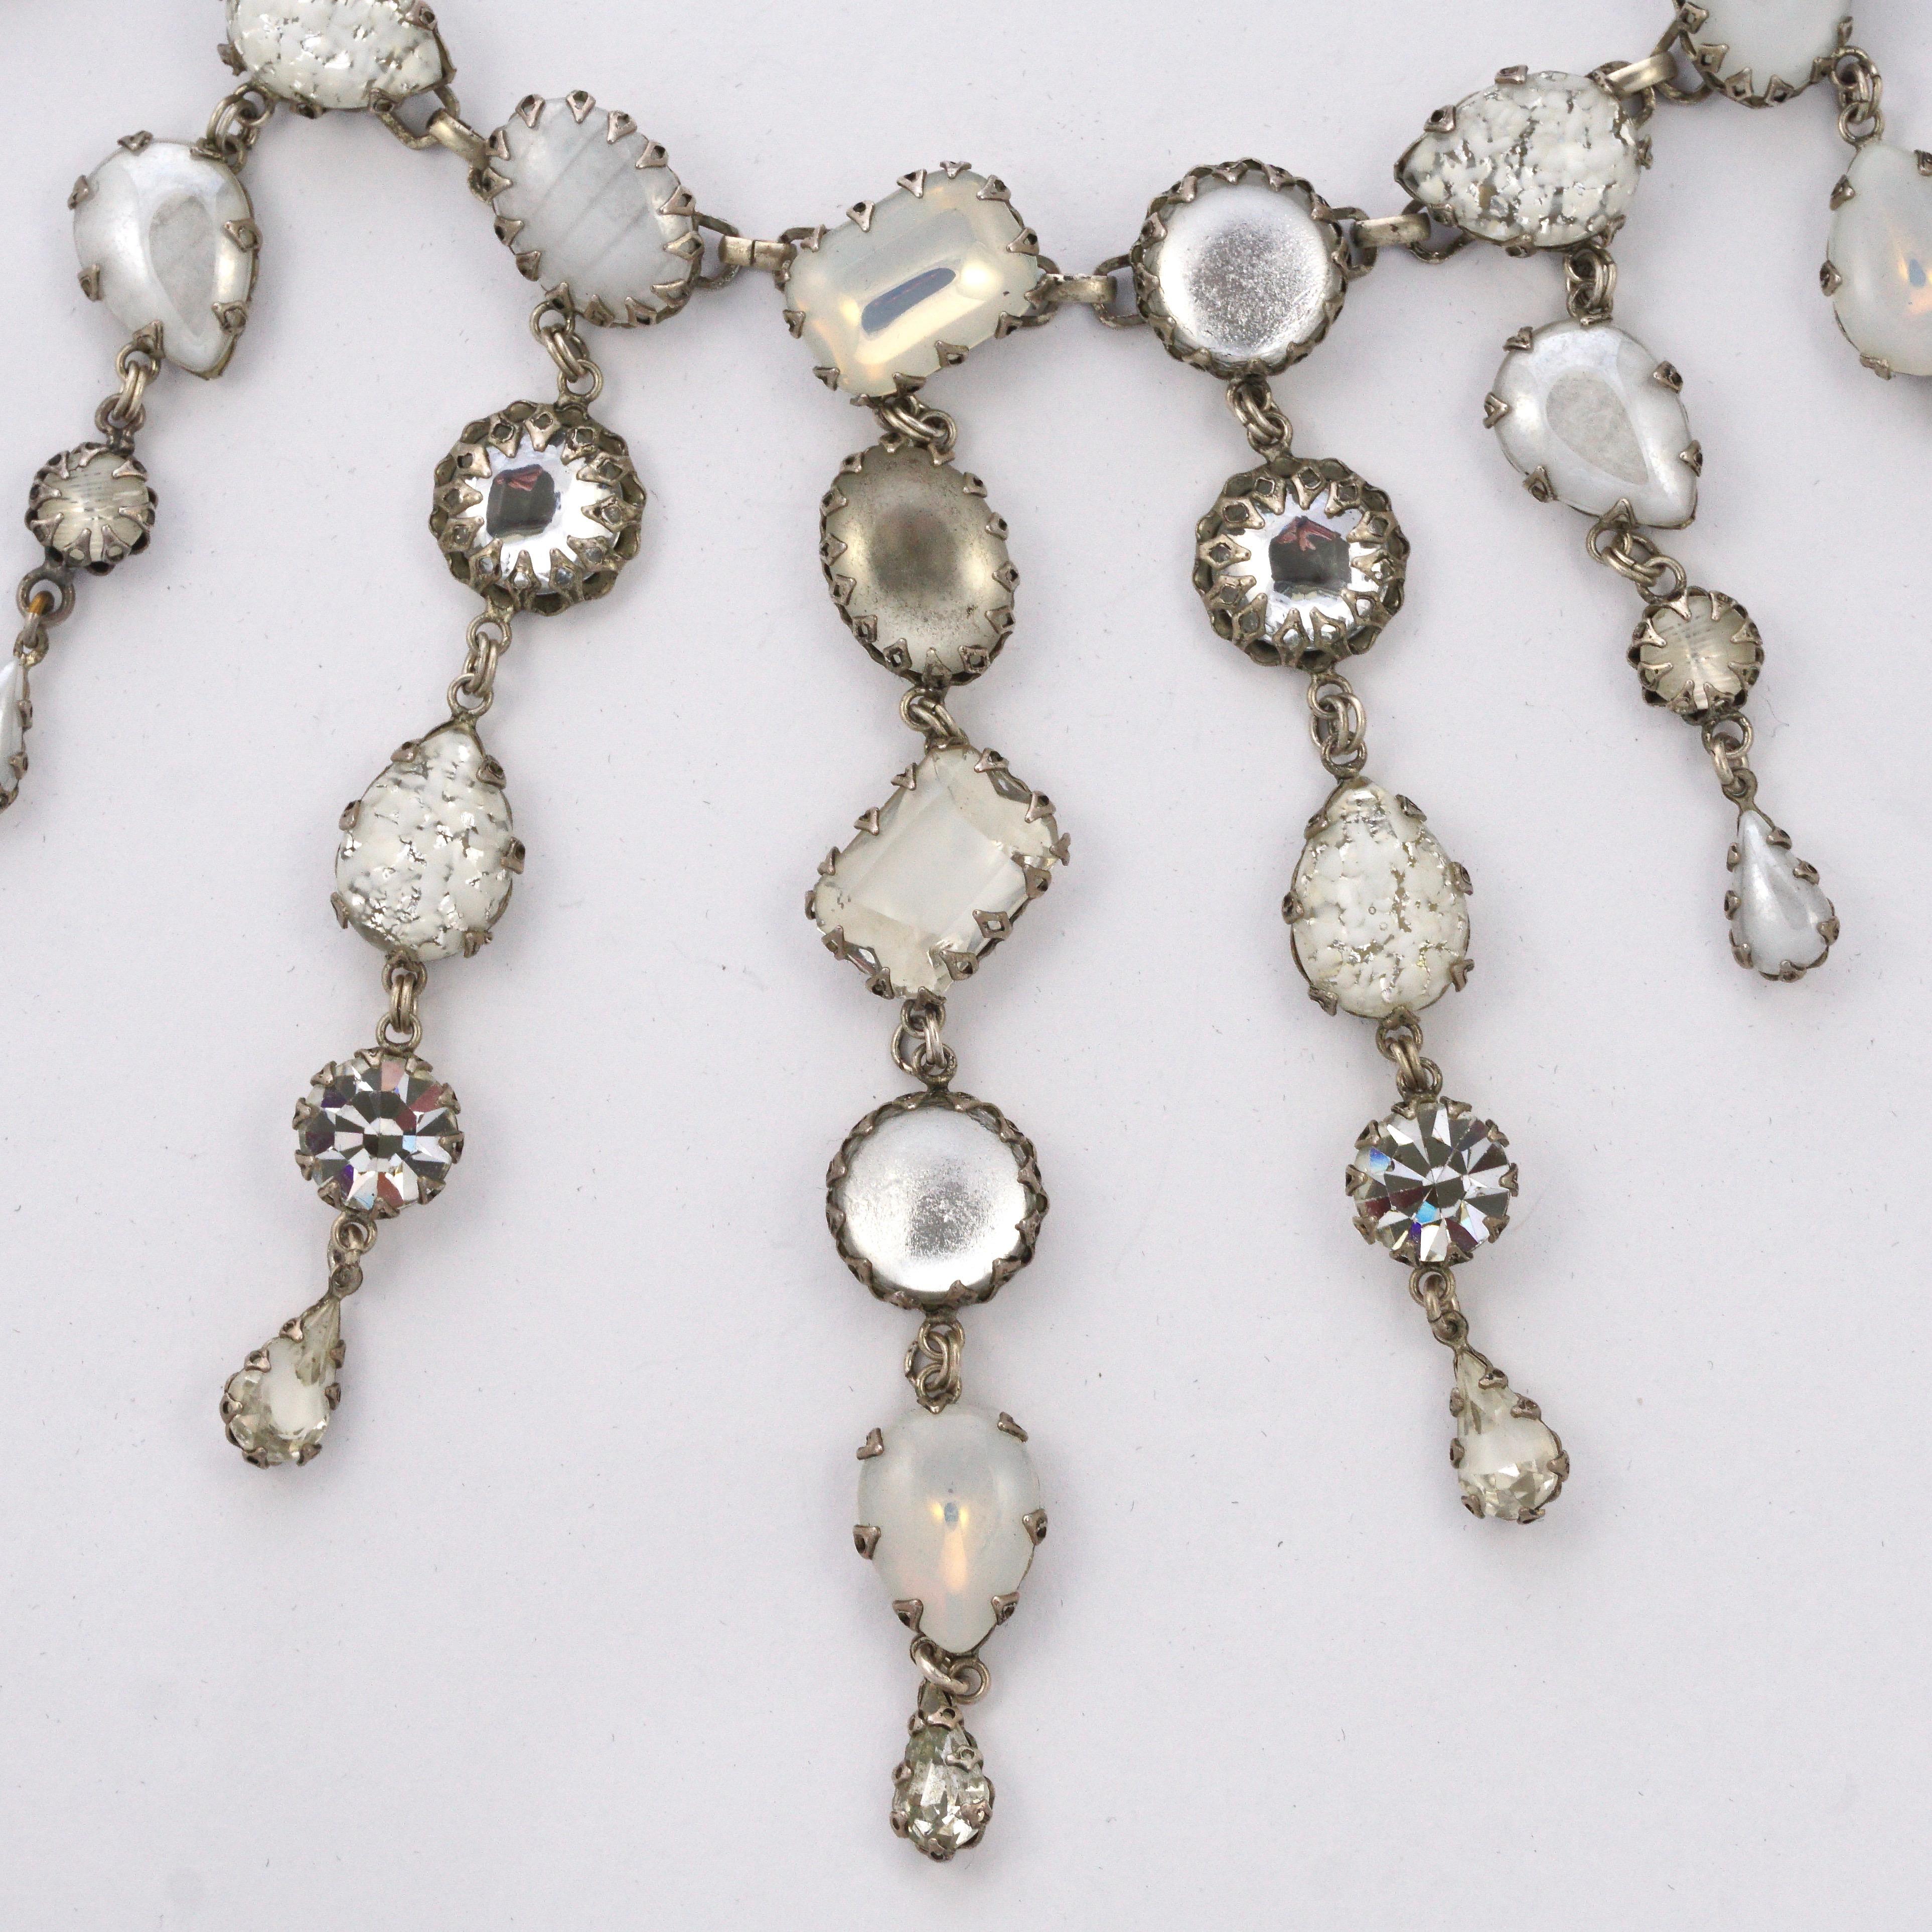 De Luxe NYC/A'dam Silver Tone White Clear and Opaline Art Glass Drop Necklace In Good Condition For Sale In London, GB